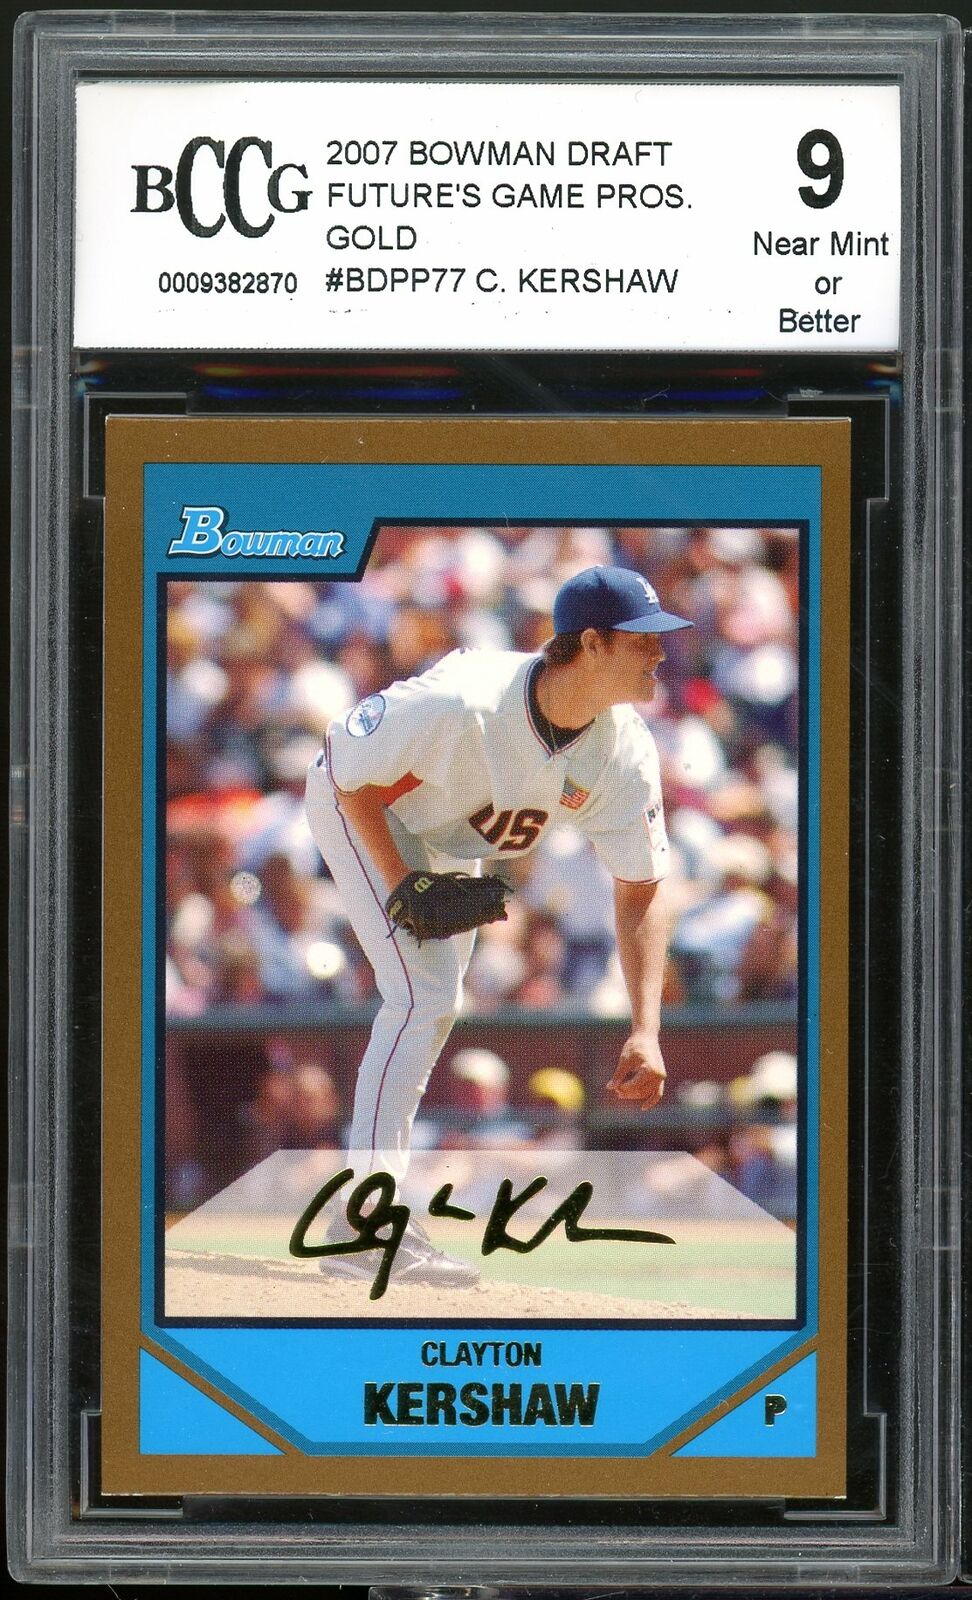 2007 Bowman Draft Futures Gold #77 Clayton Kershaw Rookie BGS BCCG 9 Near Mint+ Image 1